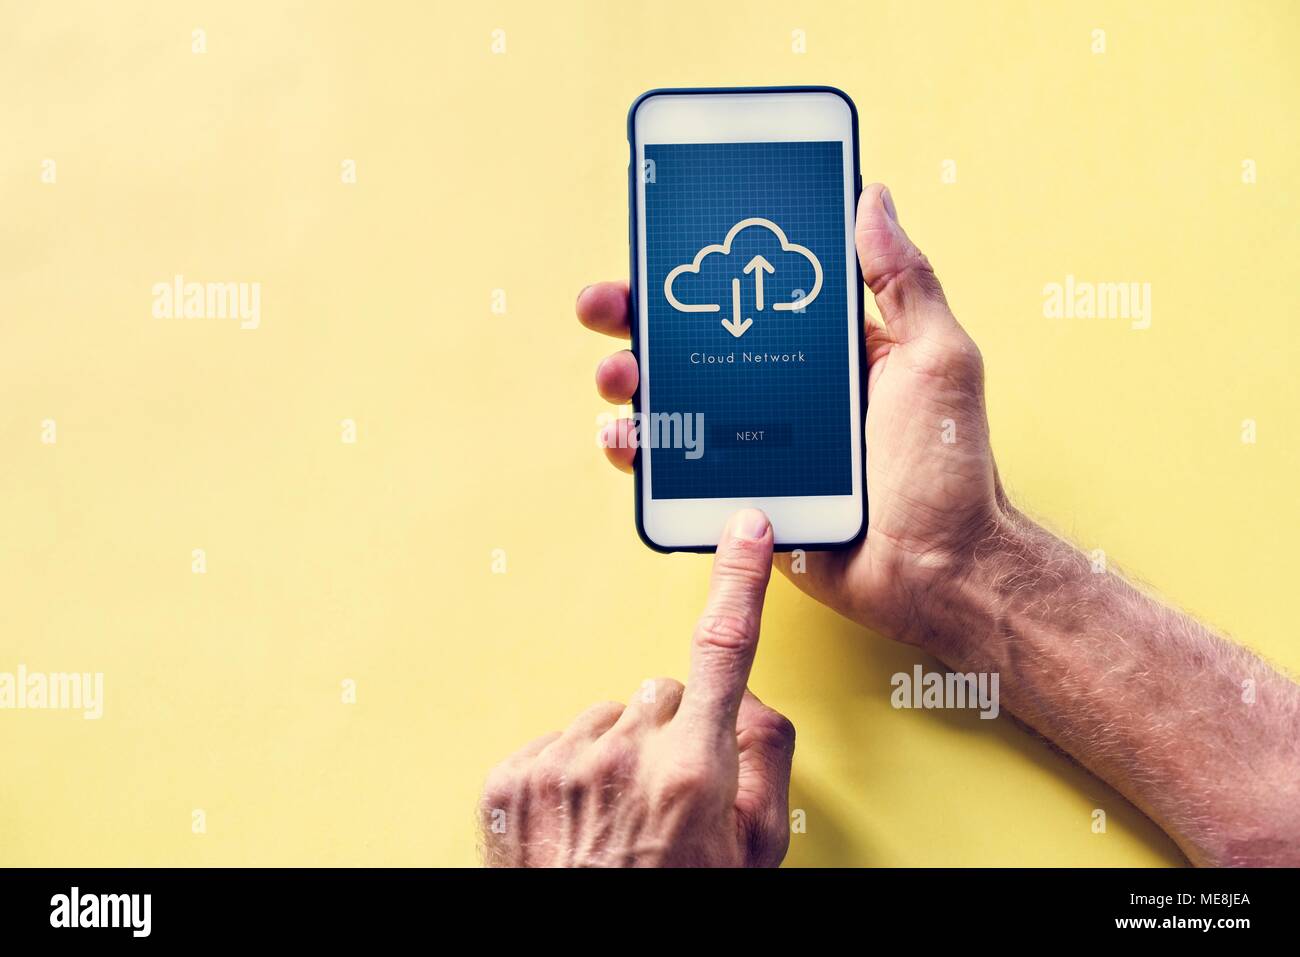 Hands holding a smartphone with cloud network on screen Stock Photo